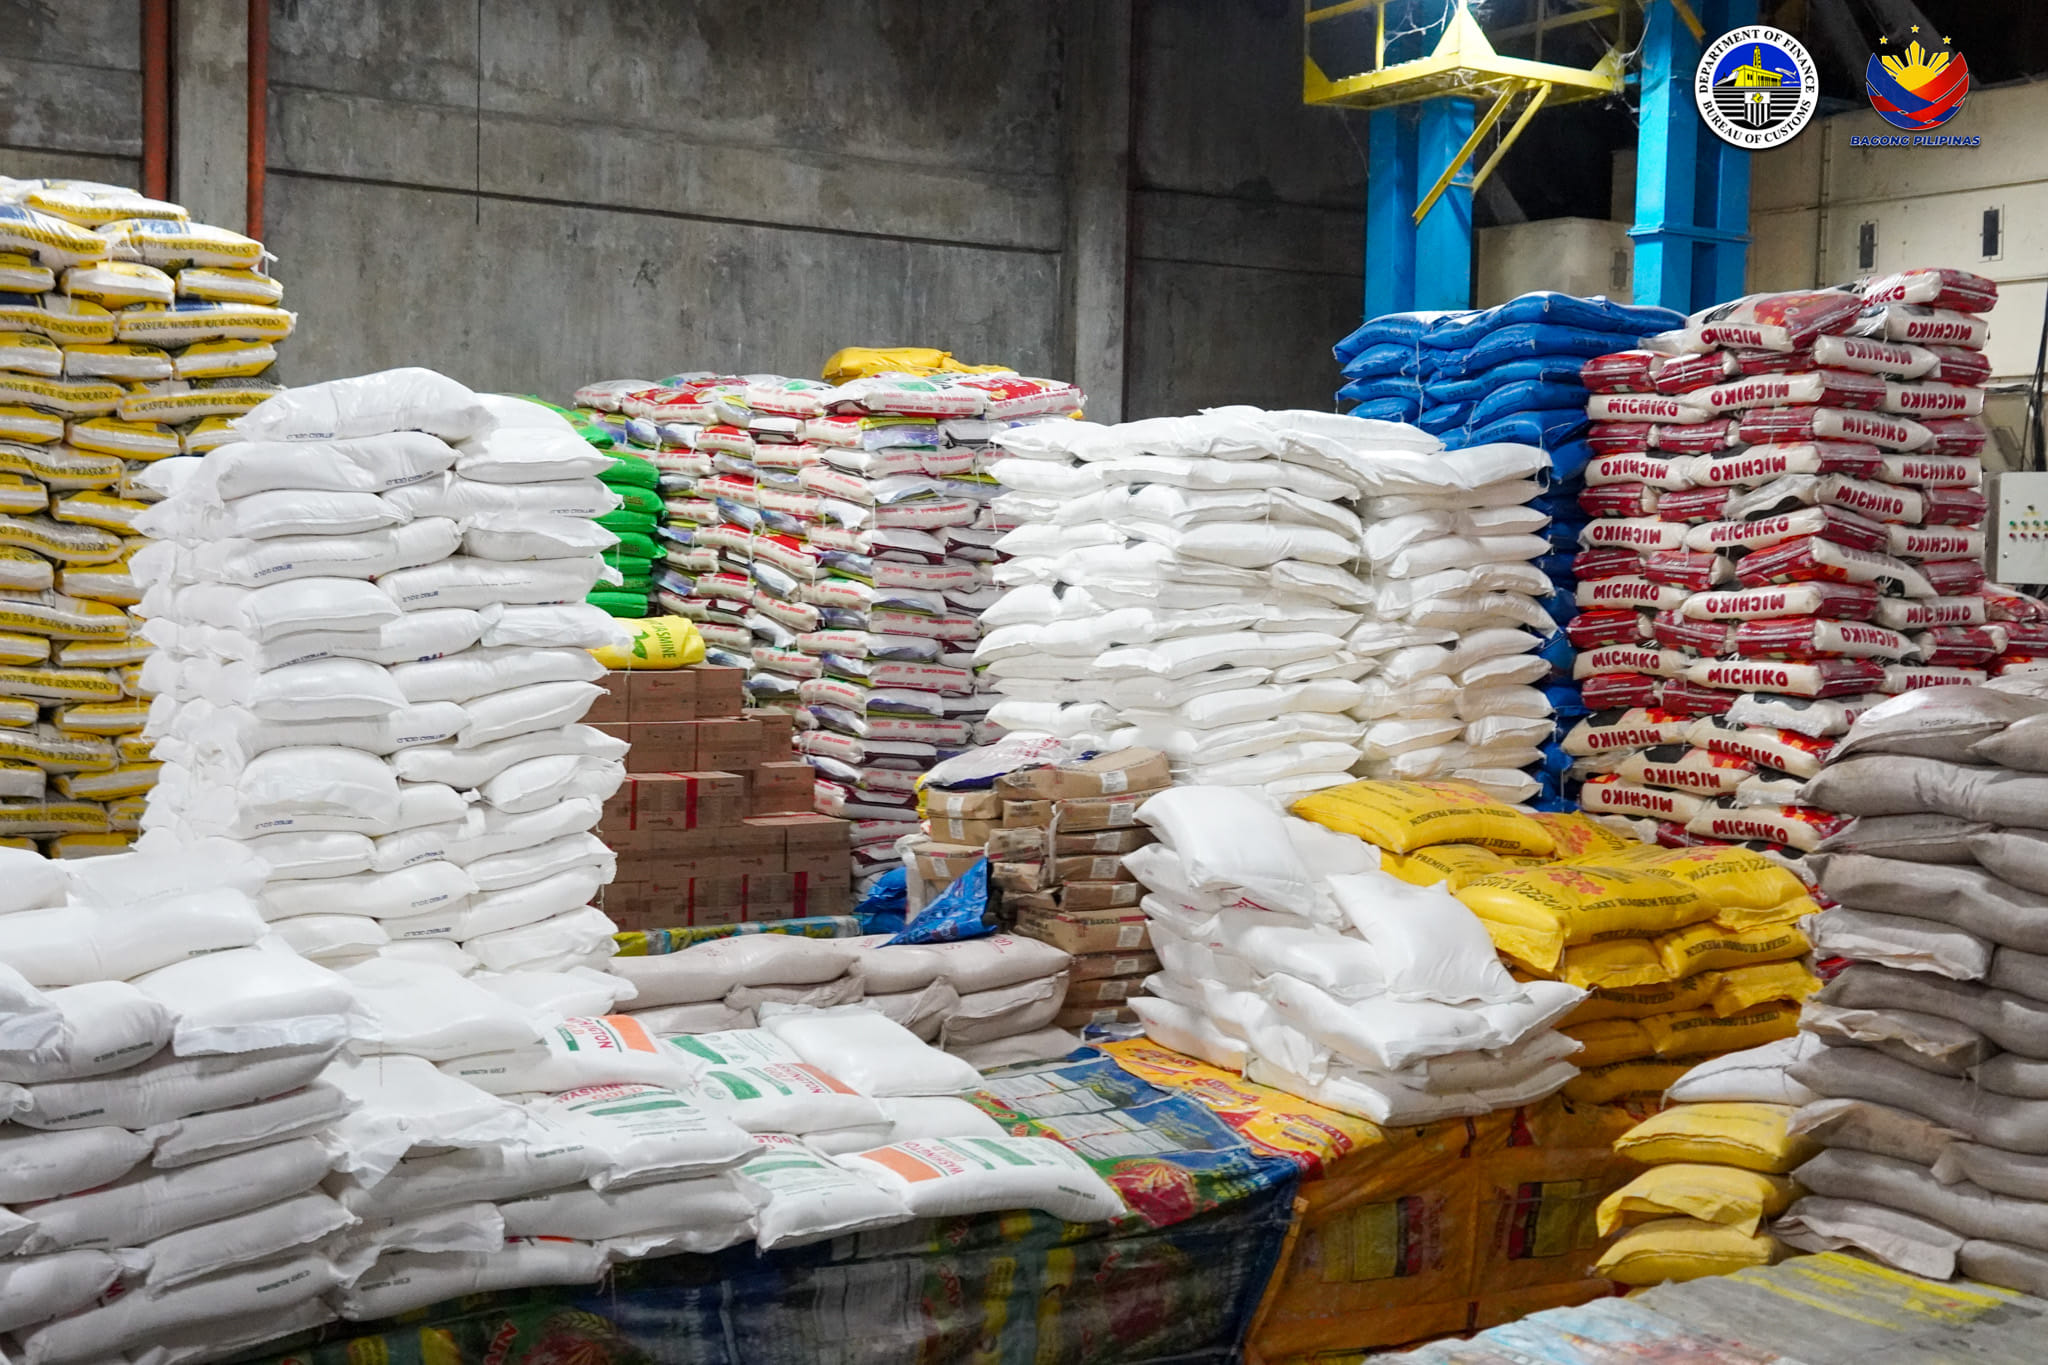 Sacks of smuggles rice kept in a warehouse were confiscated by the Bureau of Customs.